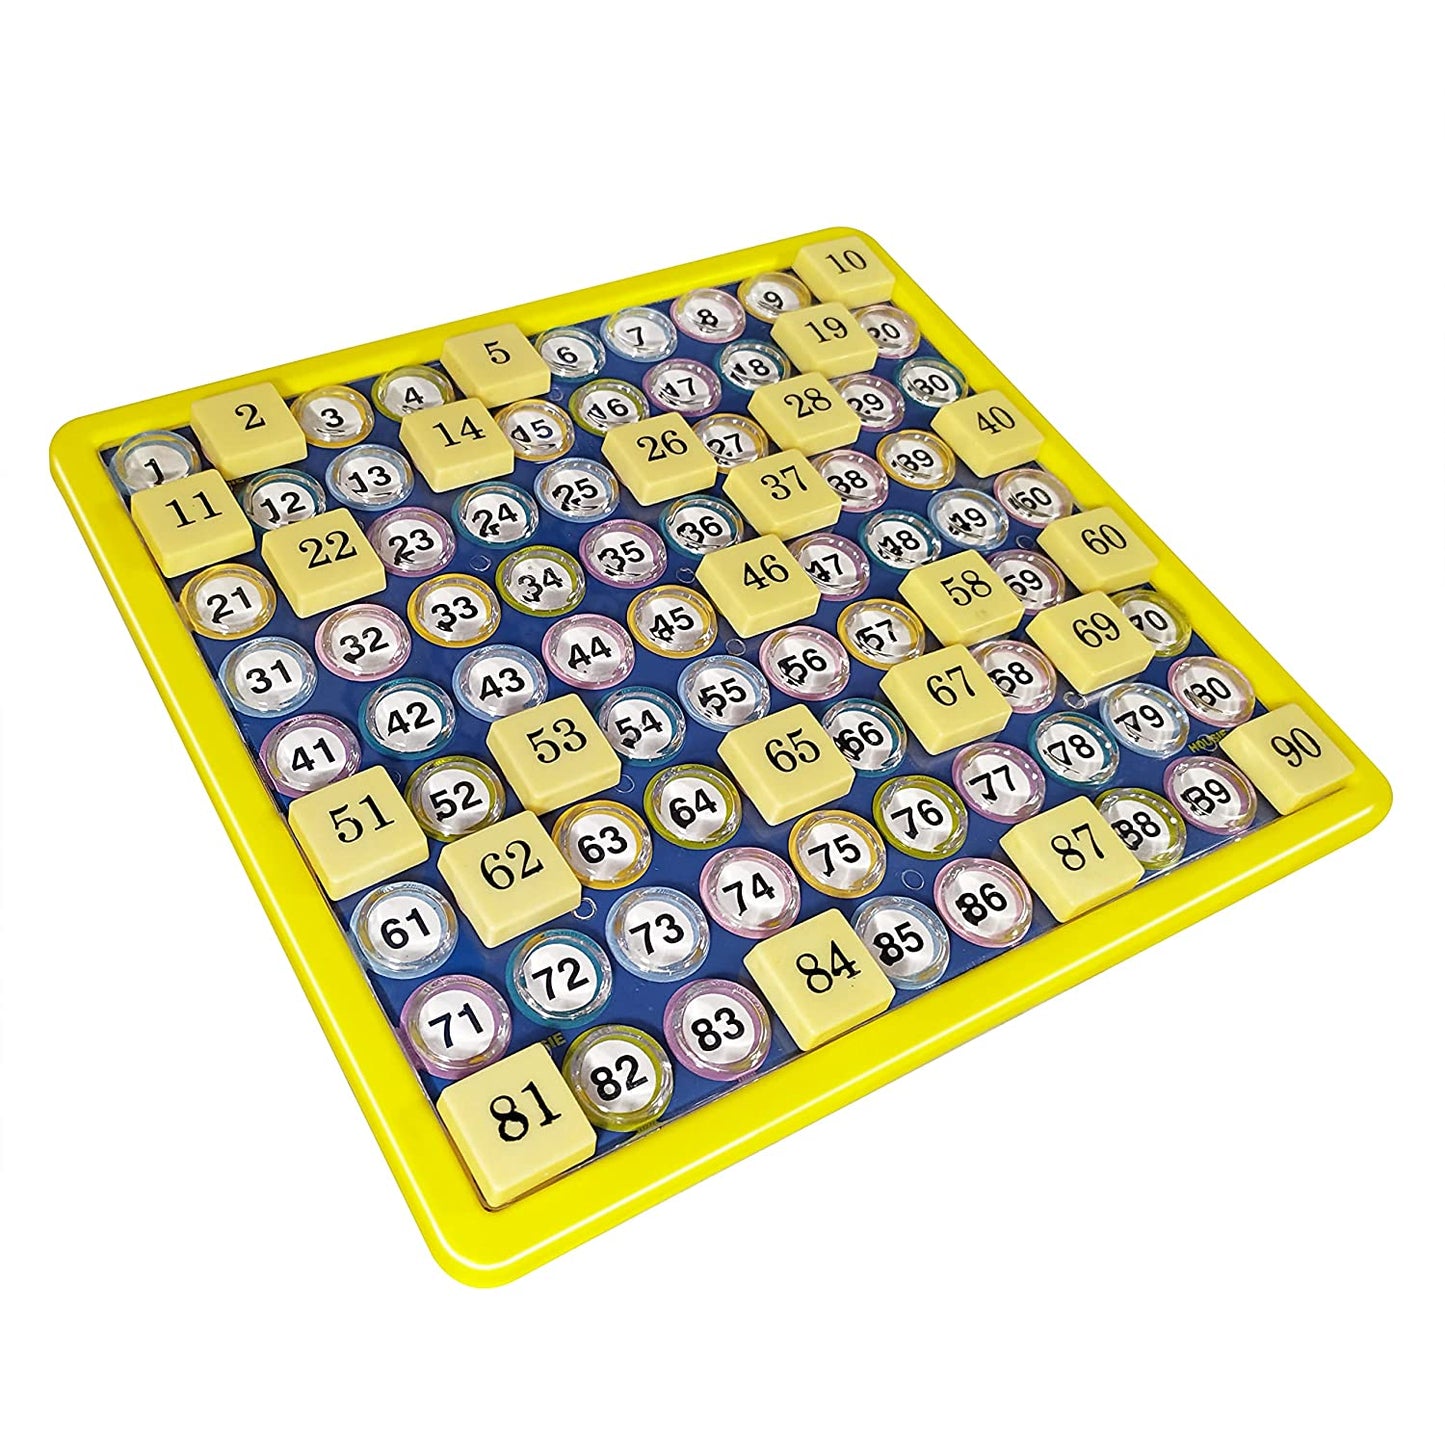 Housie Housie Game Giant 384 Foldable Tickets Party & Fun Games Board Game